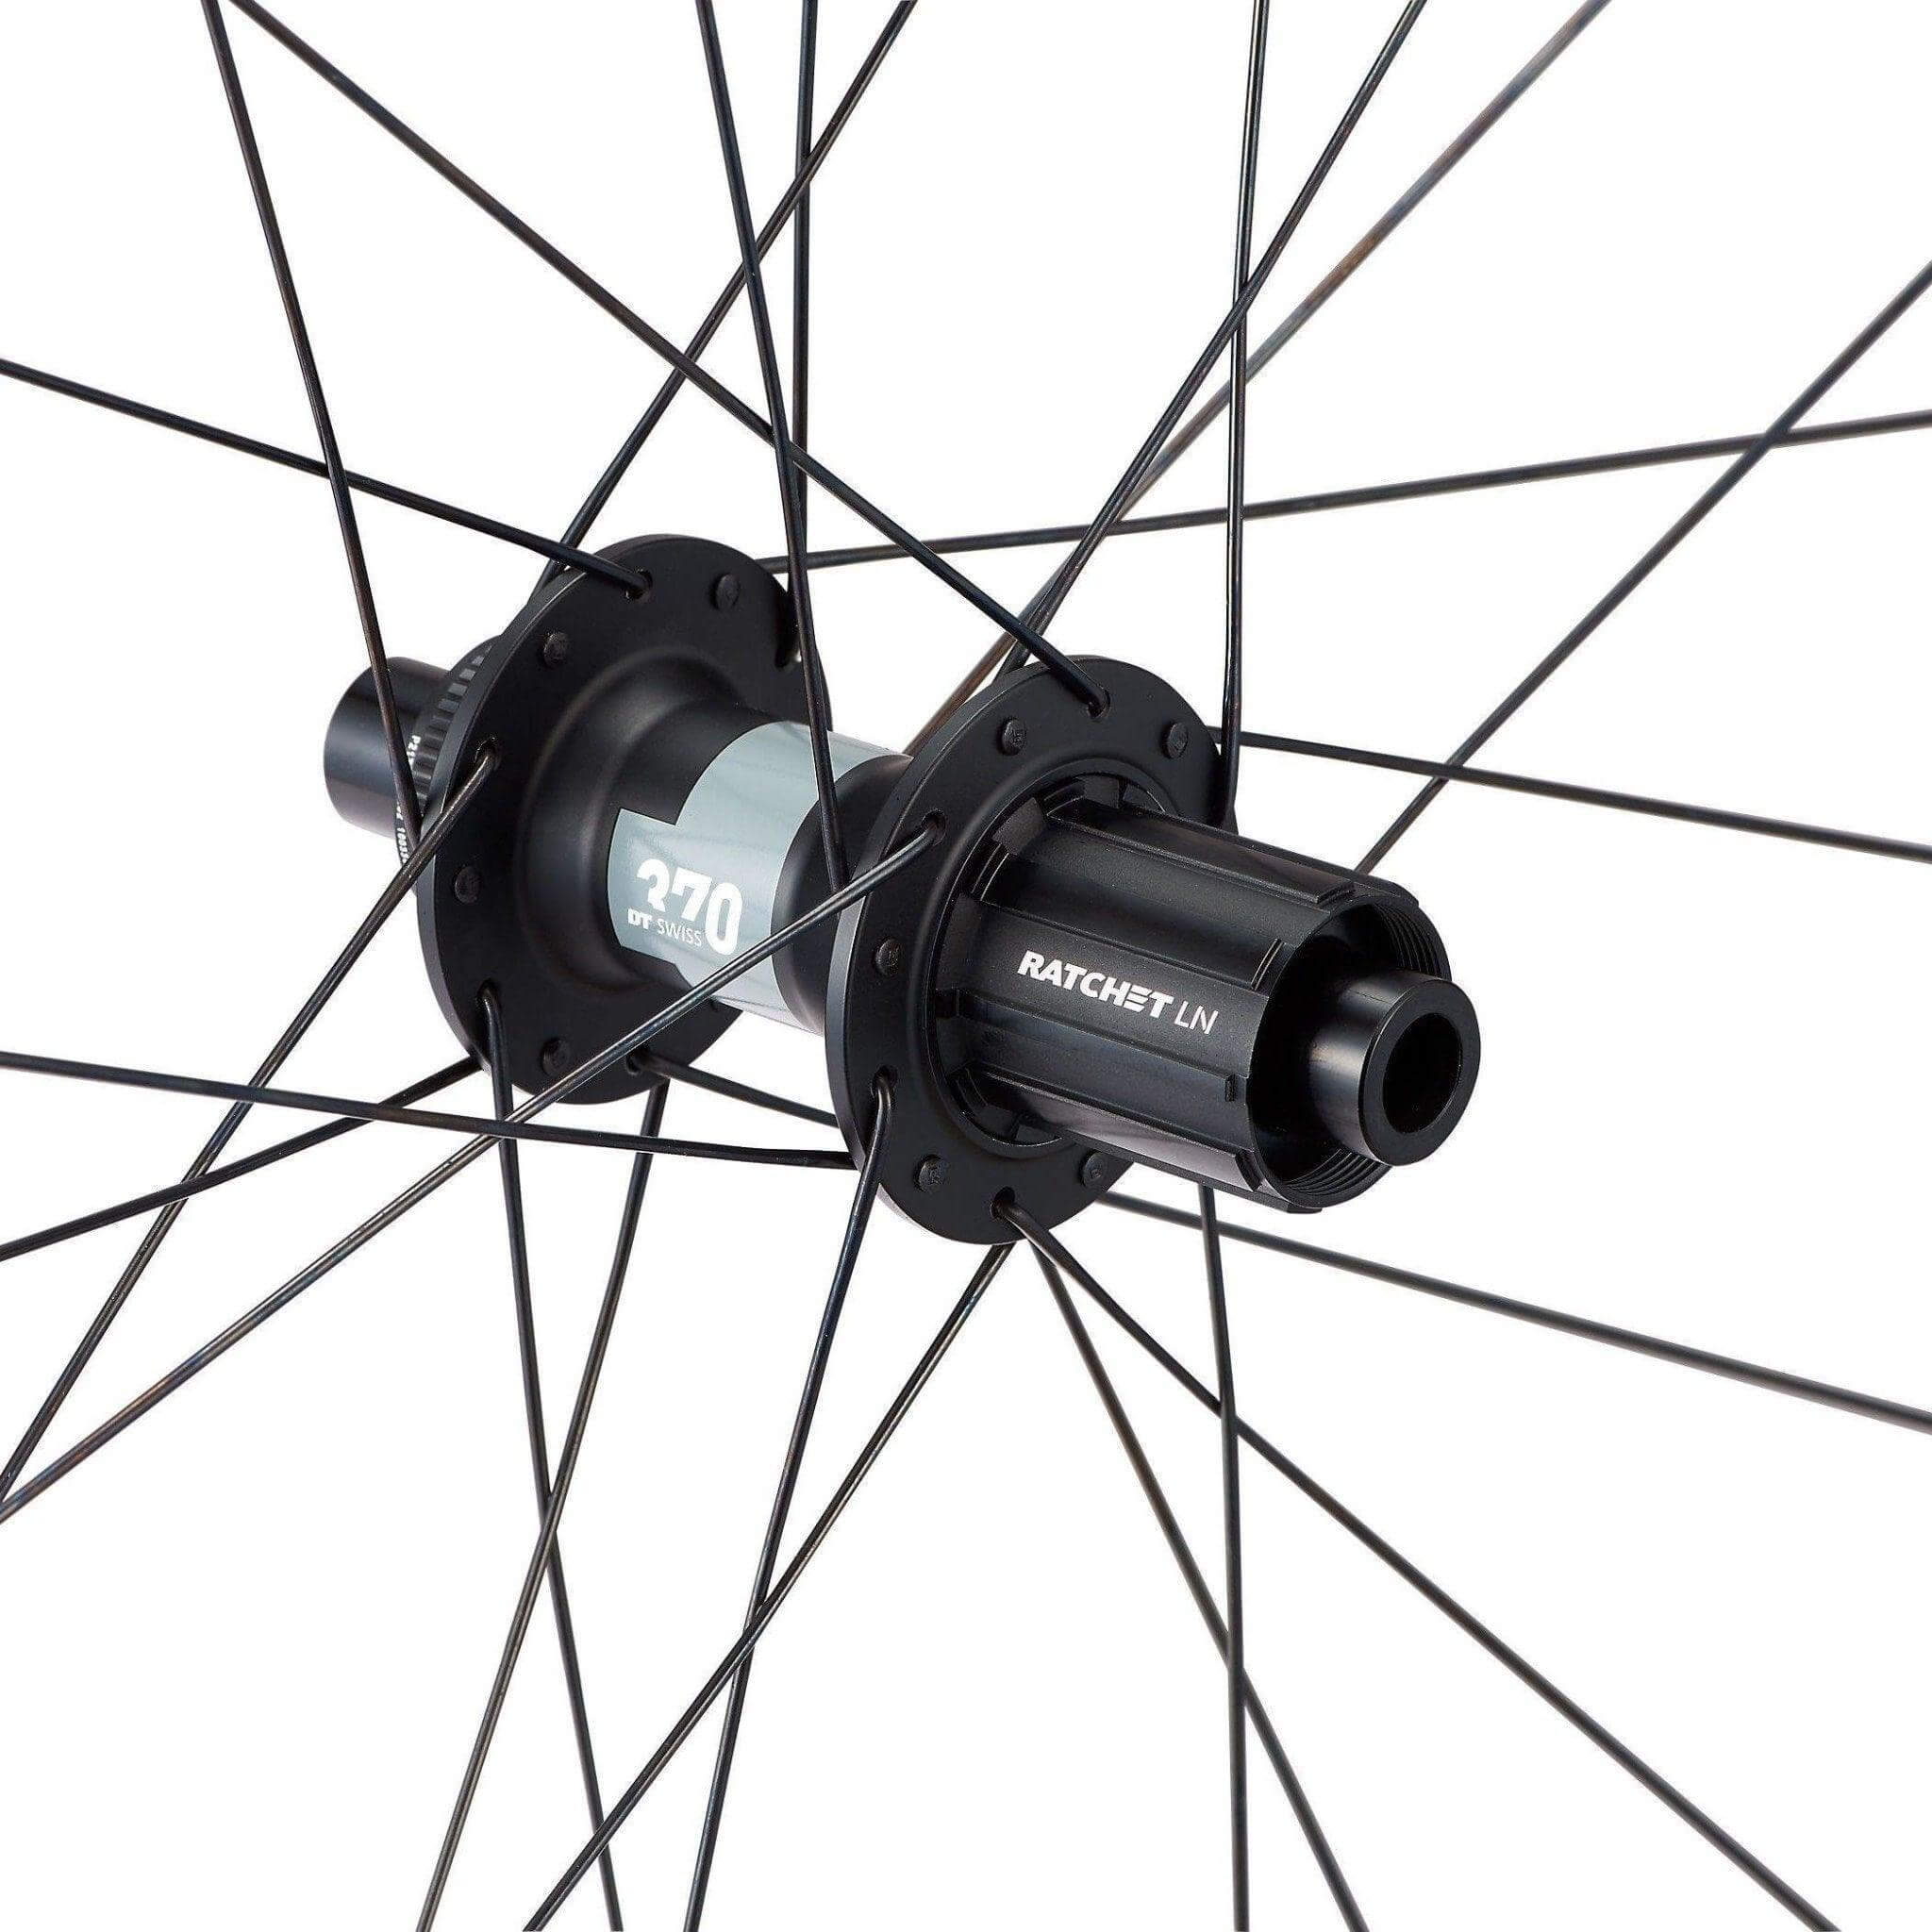 Roval Rapide C38 Disc Wheelset | Strictly Bicycles – Strictly Bicycles